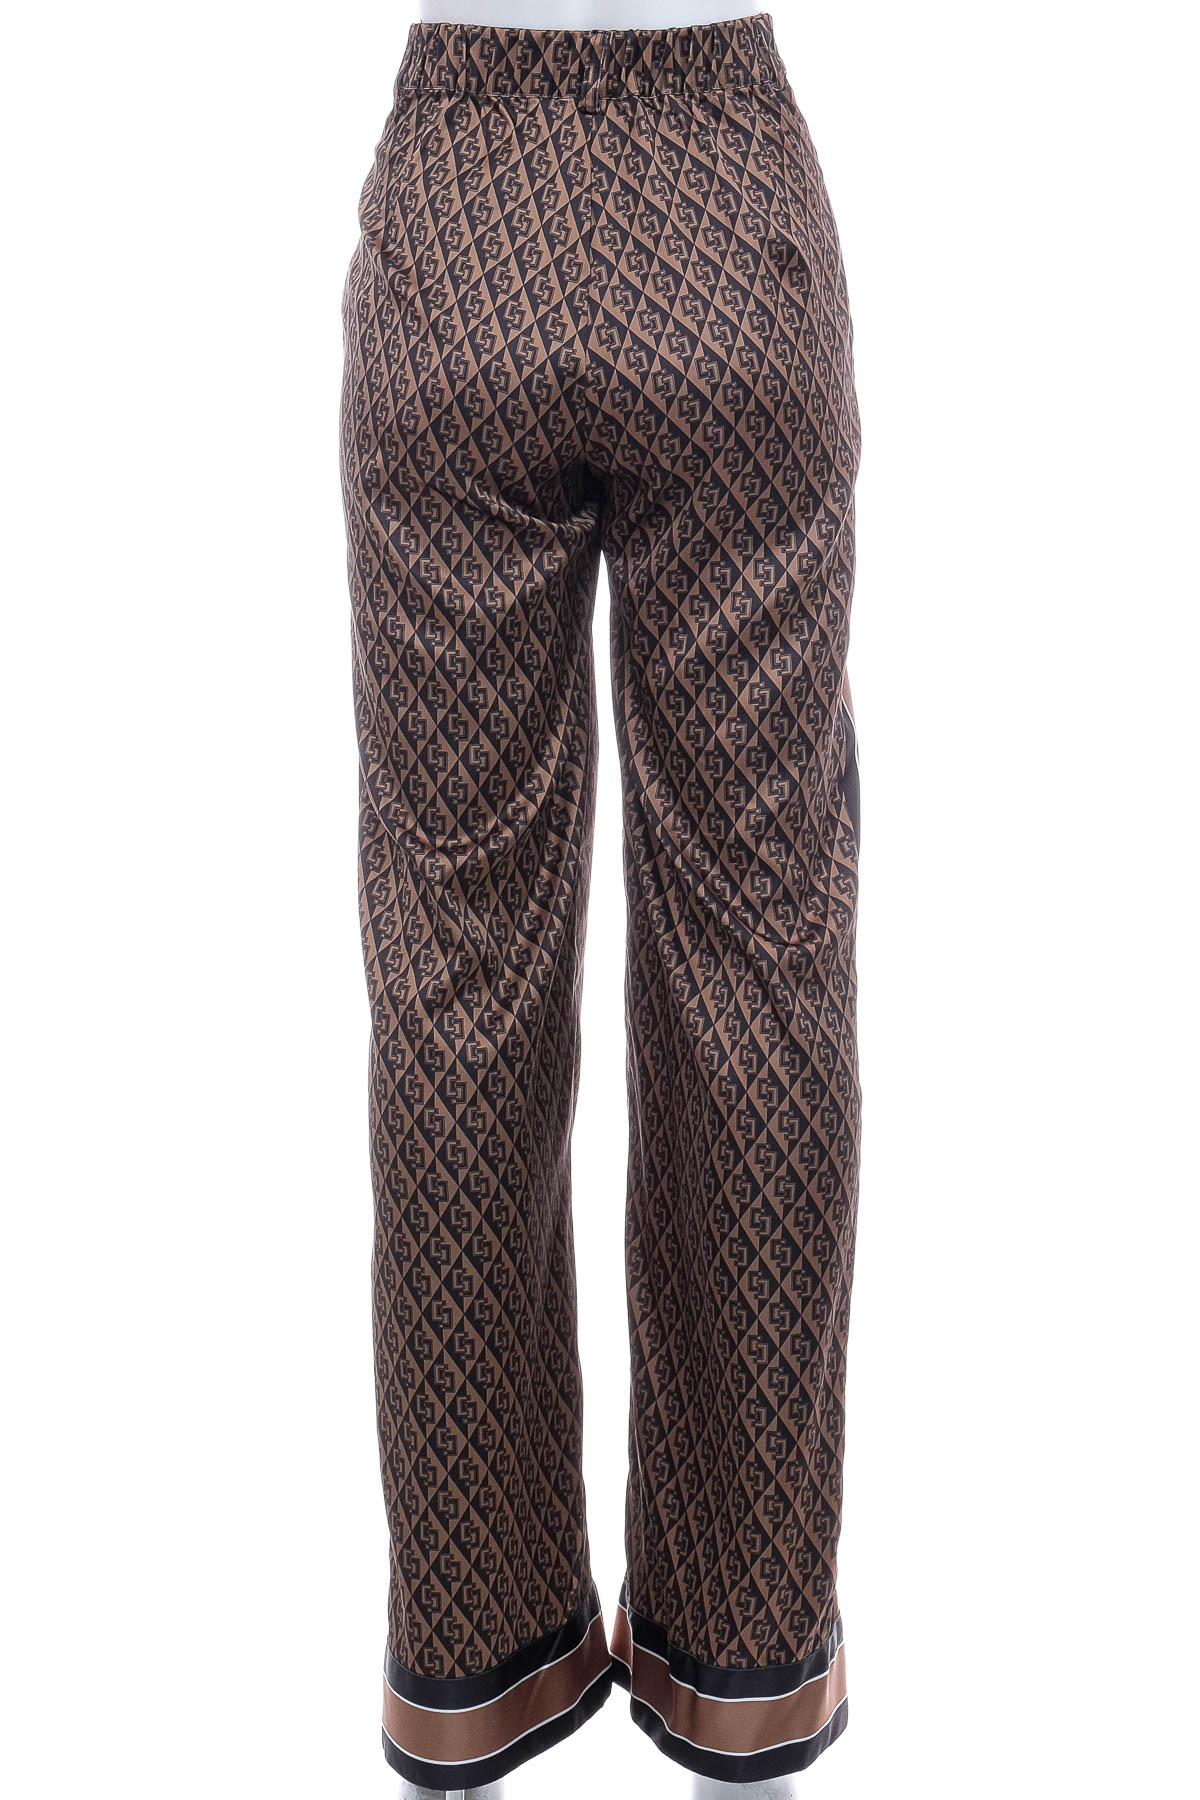 Women's trousers - Costes - 1